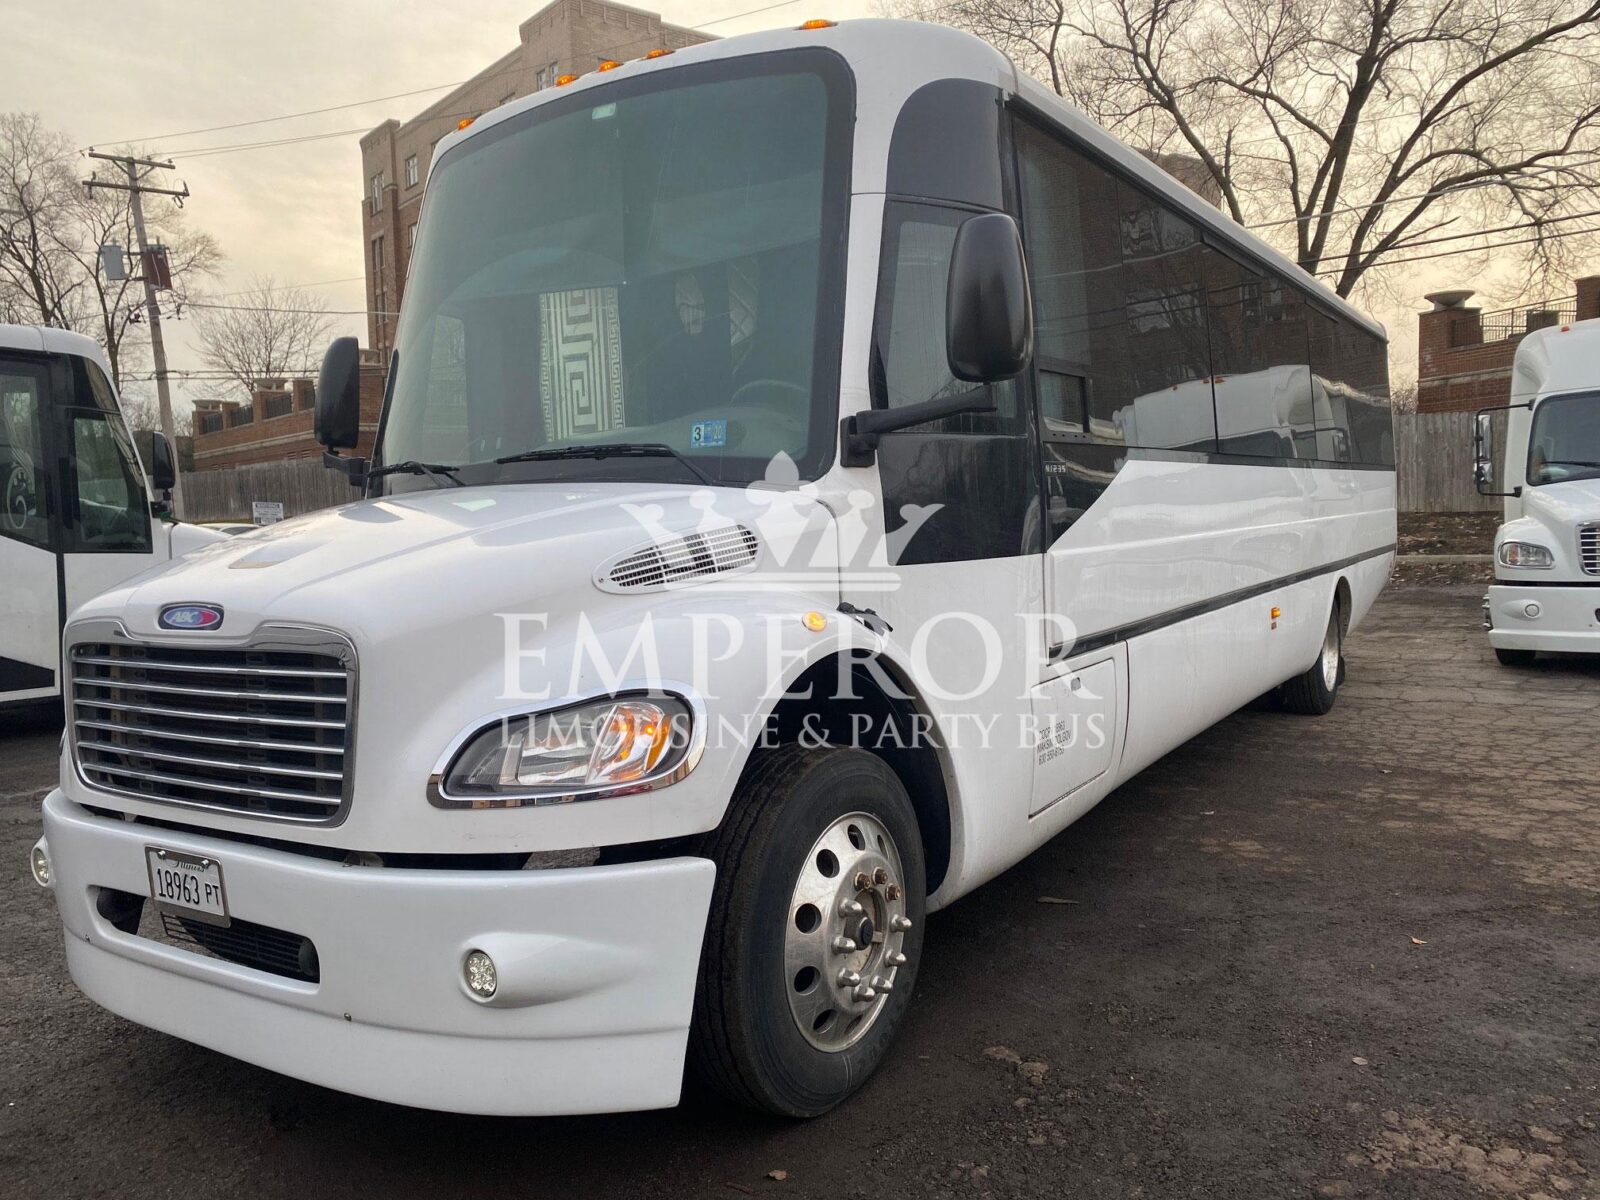 Hire party bus in Downers Grove